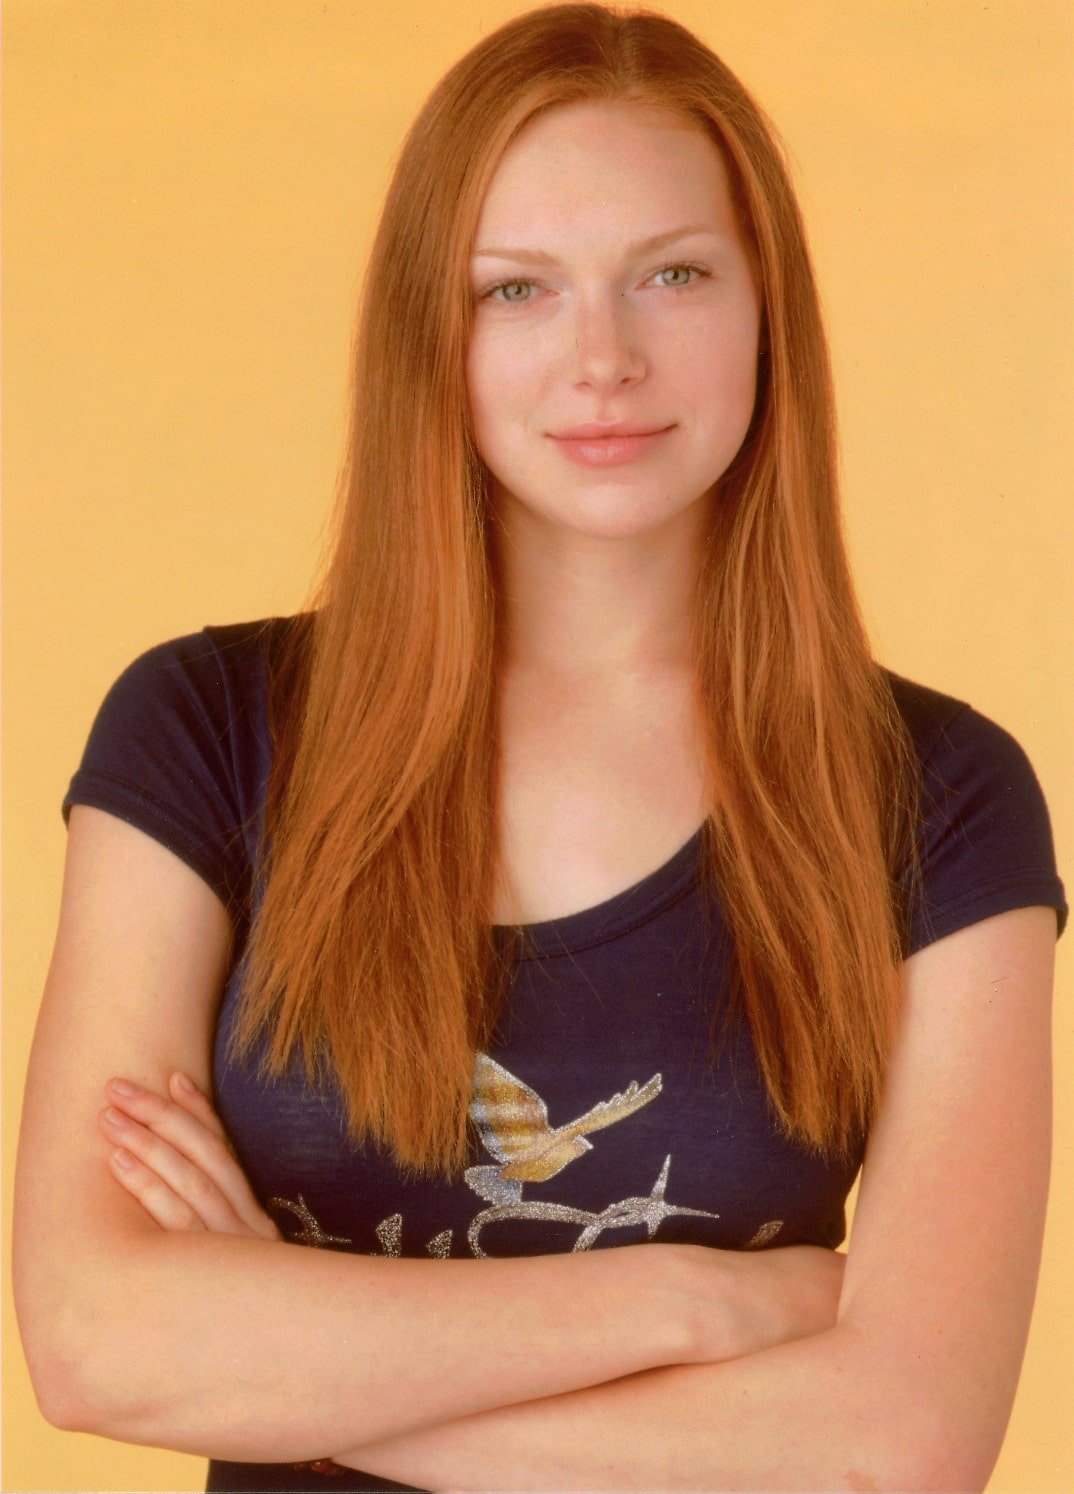 Laura Prepon is an American actress, who is best known for her roles as Donna Pinciotti in That ‘70s Show and Alex Vause in Orange Is the New Black